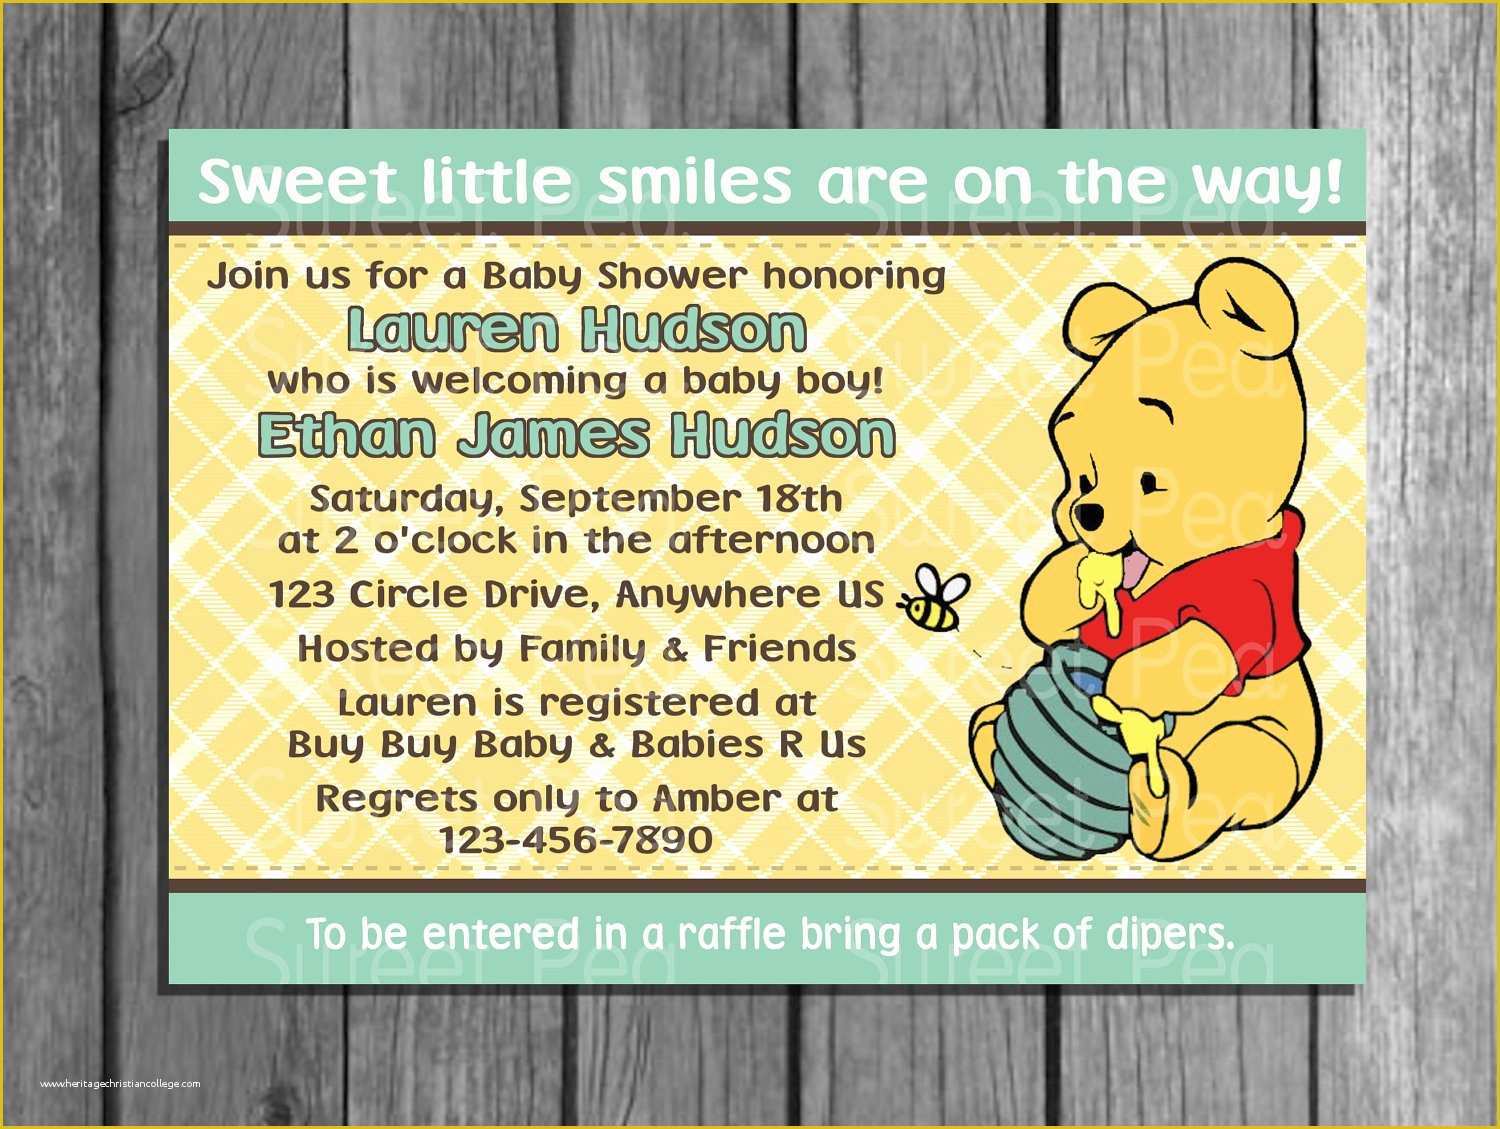 Winnie the Pooh Baby Shower Invitations Templates Free Of Pooh Bear Baby Shower Invitation Thank You Card Invites